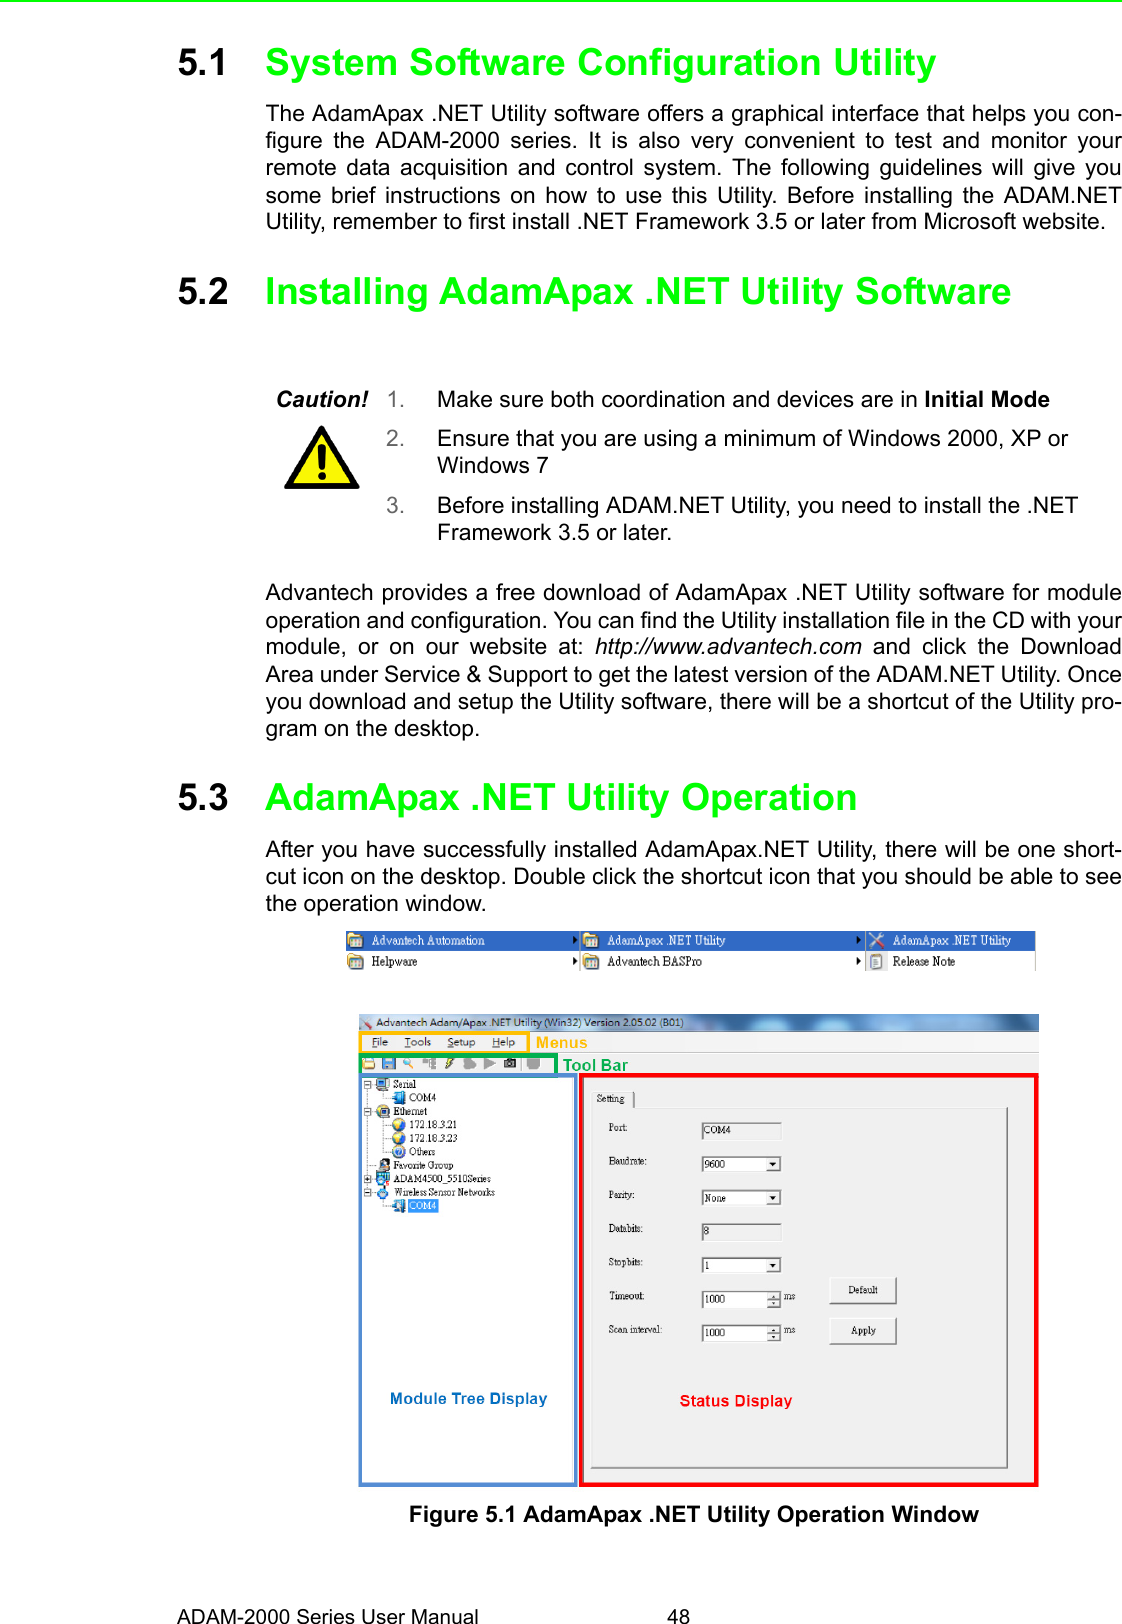 ADAM-2000 Series User Manual 485.1 System Software Configuration UtilityThe AdamApax .NET Utility software offers a graphical interface that helps you con-figure the ADAM-2000 series. It is also very convenient to test and monitor yourremote data acquisition and control system. The following guidelines will give yousome brief instructions on how to use this Utility. Before installing the ADAM.NETUtility, remember to first install .NET Framework 3.5 or later from Microsoft website. 5.2 Installing AdamApax .NET Utility SoftwareAdvantech provides a free download of AdamApax .NET Utility software for moduleoperation and configuration. You can find the Utility installation file in the CD with yourmodule, or on our website at: http://www.advantech.com and click the DownloadArea under Service &amp; Support to get the latest version of the ADAM.NET Utility. Onceyou download and setup the Utility software, there will be a shortcut of the Utility pro-gram on the desktop. 5.3 AdamApax .NET Utility Operation After you have successfully installed AdamApax.NET Utility, there will be one short-cut icon on the desktop. Double click the shortcut icon that you should be able to seethe operation window.Figure 5.1 AdamApax .NET Utility Operation WindowCaution! 1. Make sure both coordination and devices are in Initial Mode2. Ensure that you are using a minimum of Windows 2000, XP or Windows 73. Before installing ADAM.NET Utility, you need to install the .NET Framework 3.5 or later. 